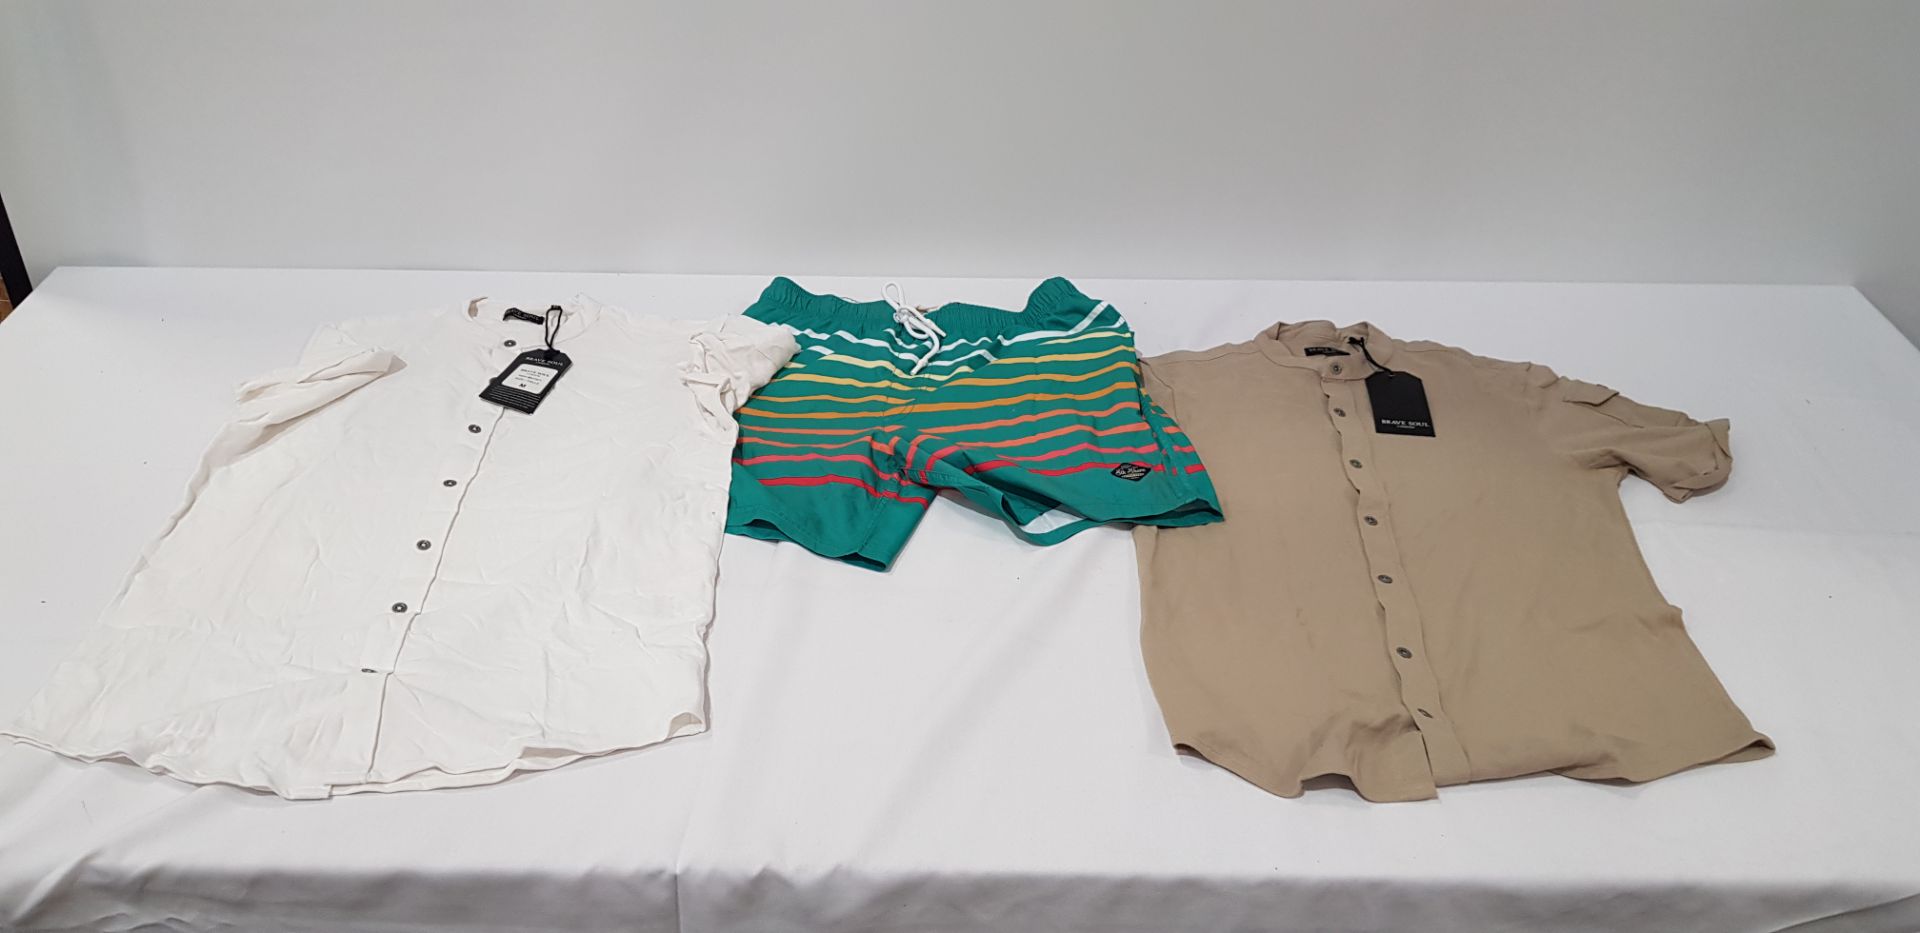 22 X BRAND NEW MIXED LOT CONTAINING 12 BRAVE SOUL T-SHIRTS IN CREAM/ GREEN AND WHITE COLOURS - IN